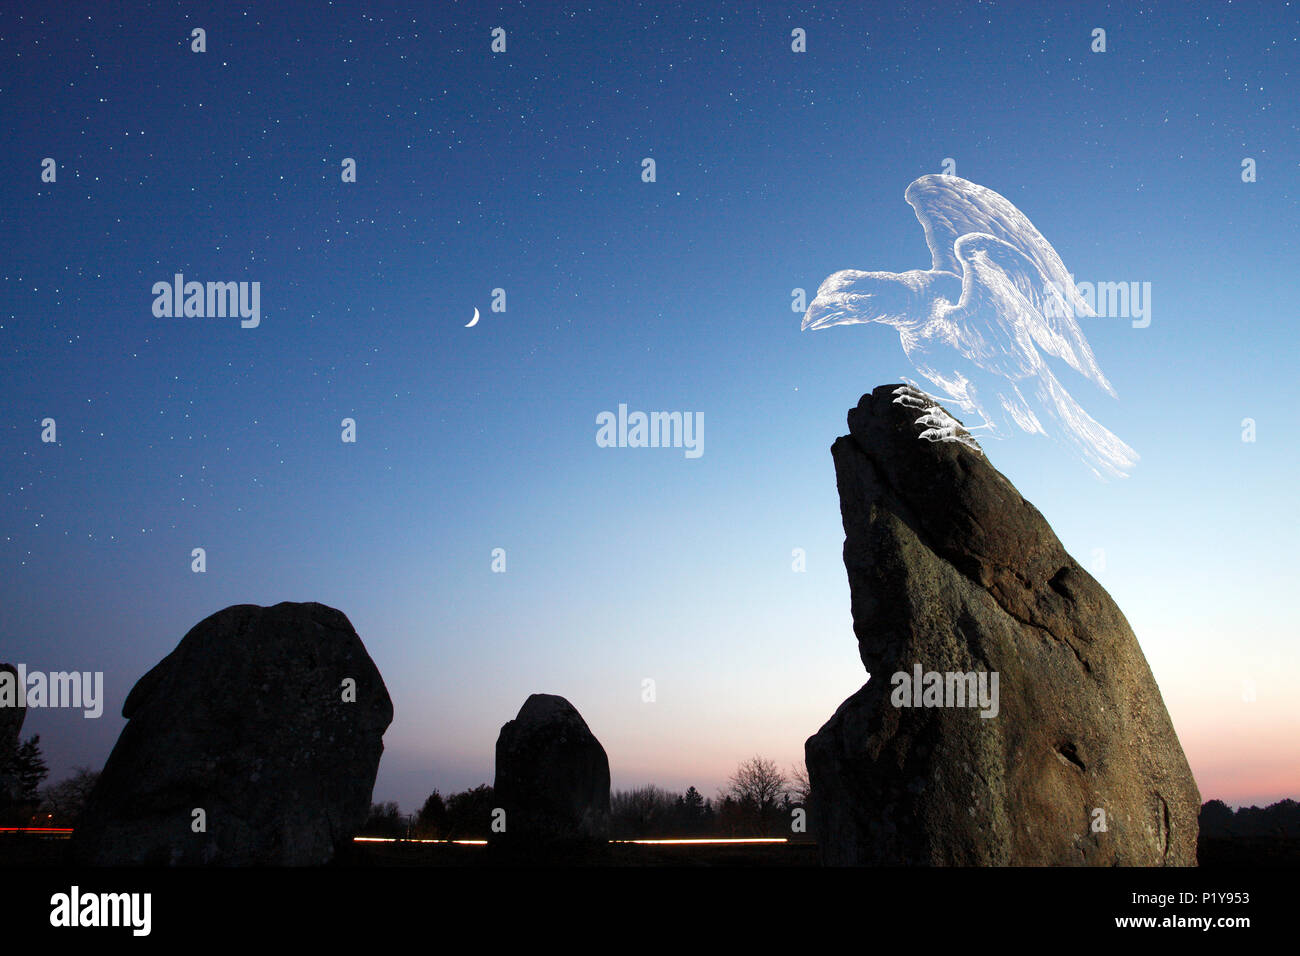 Morbihan, Carnac, menhirs, alignment of Kermario in the twilight, stars. The constellation of the Corbel looks with desire the crescent of the moon. Stock Photo